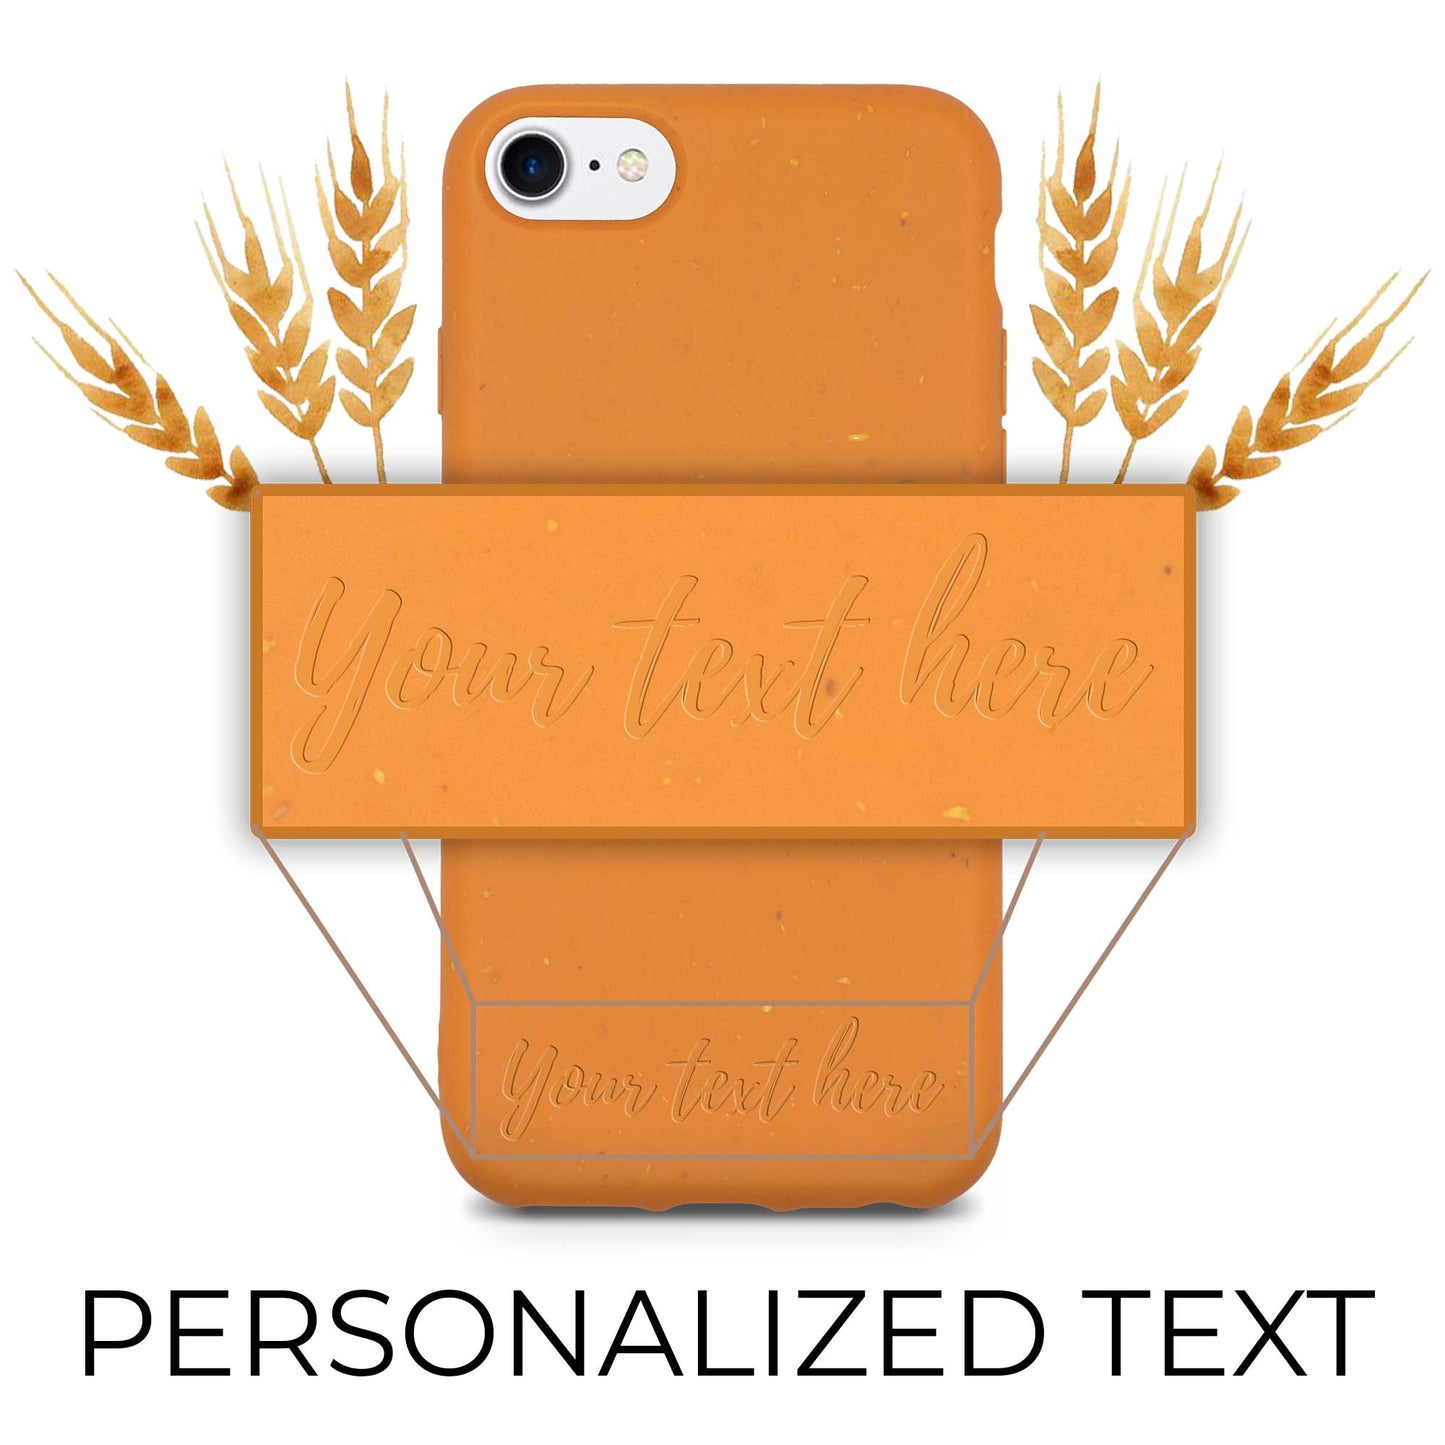 Customizable Eco-Friendly Biodegradable Phone Case, Orange - Personalized Text Engraving